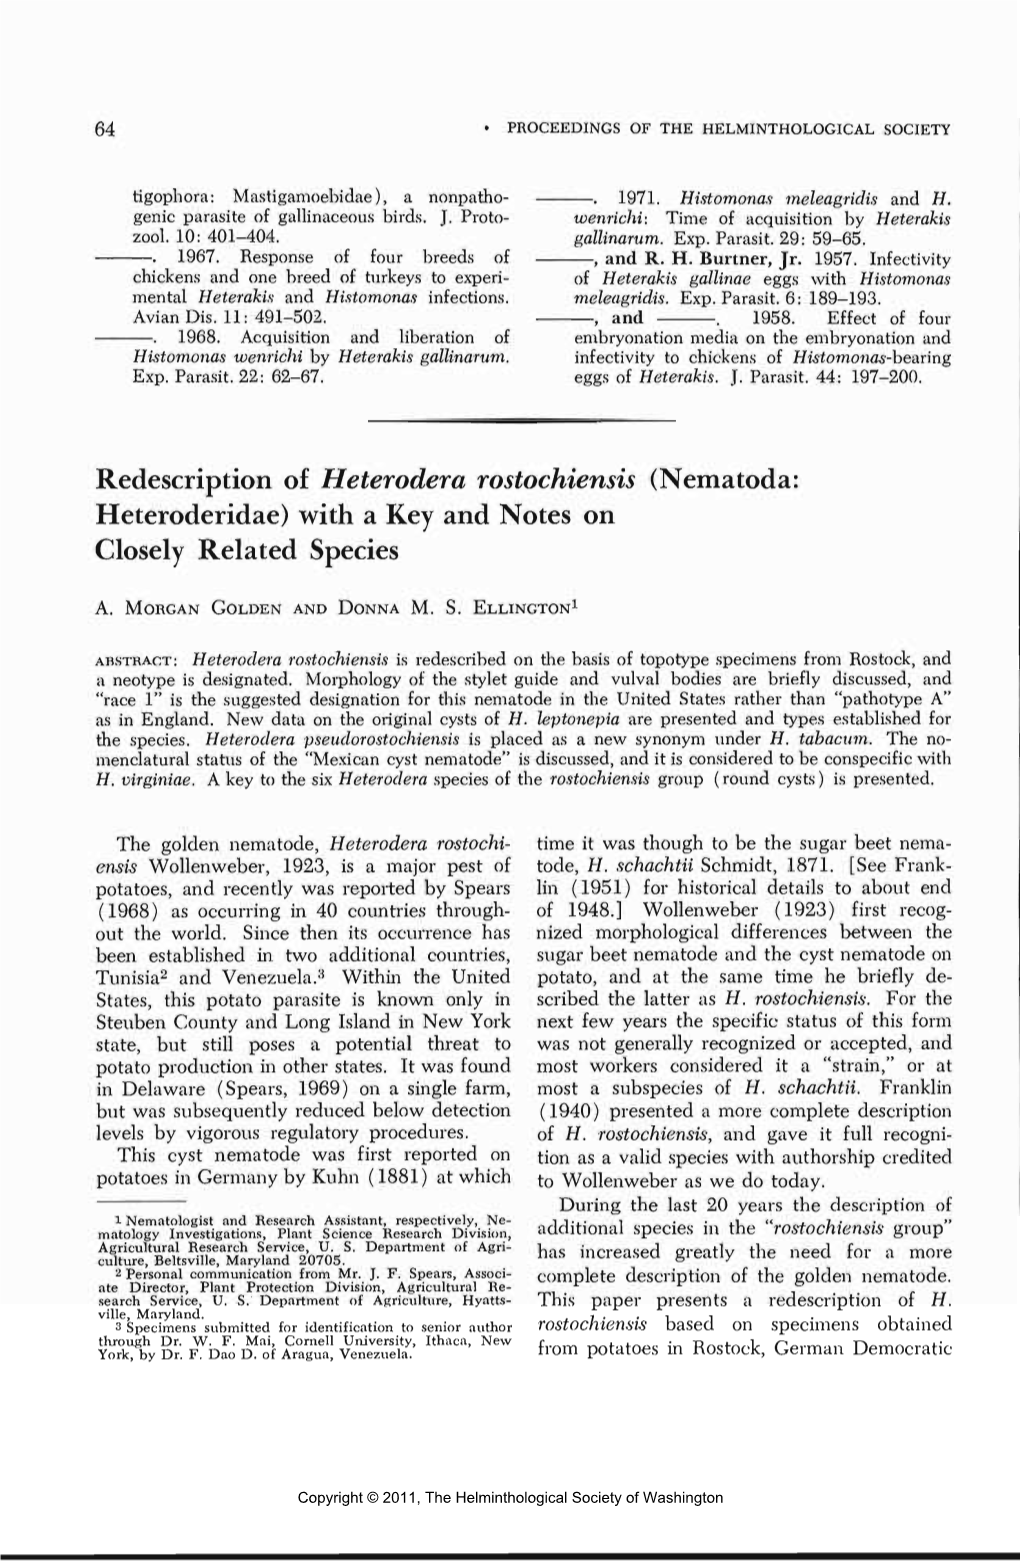 Redescription of Heterodera Rostochiensis (Nematoda: Heteroderidae) with a Key and Notes on Closely Related Species